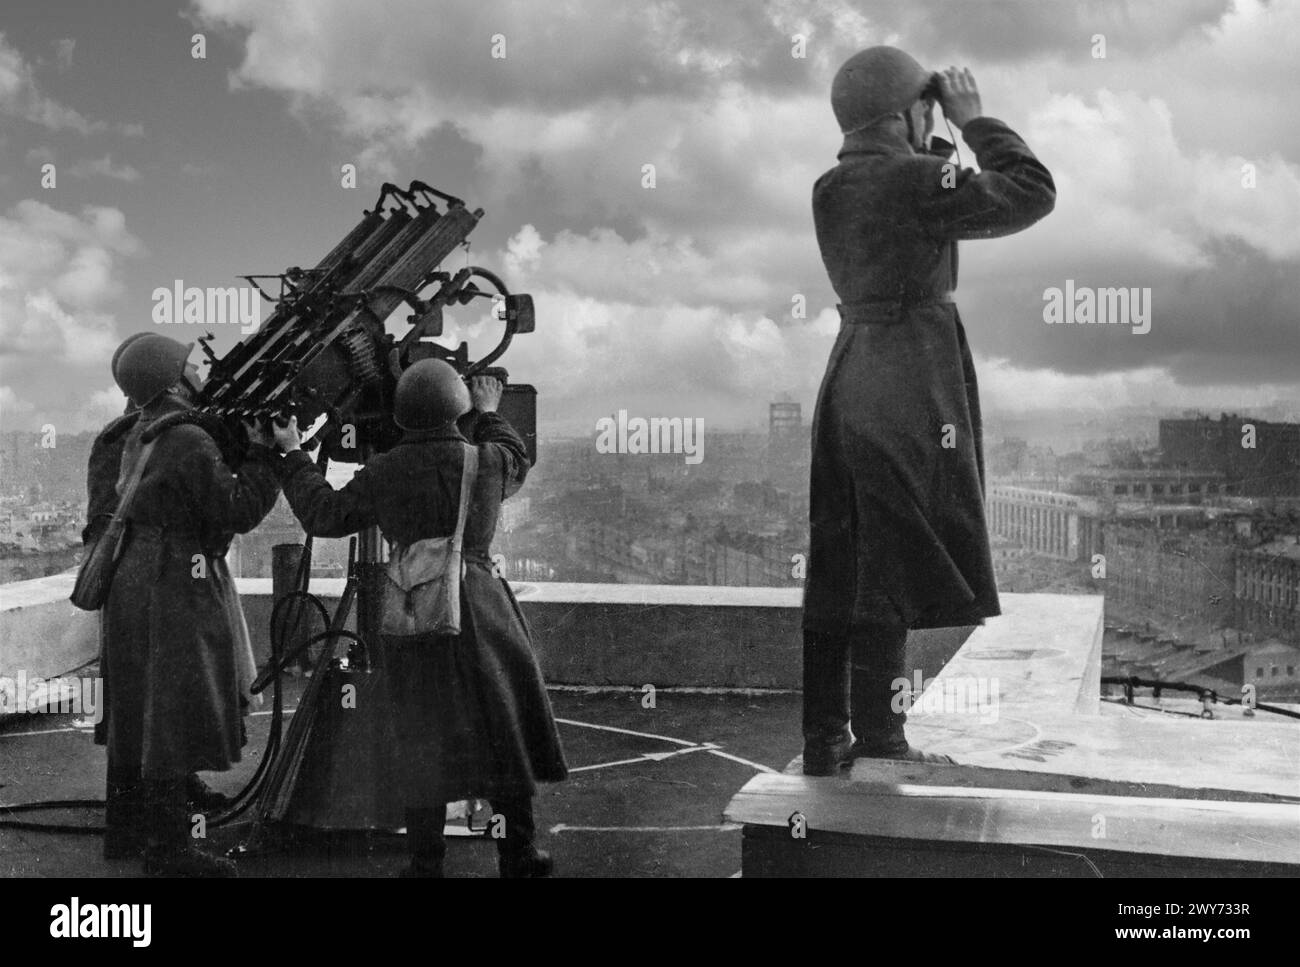 WW2 Russia 1941 Red Army soldiers scan the skies for Nazi Germany bomber aircraft as they man a quadruple anti-aircraft M-4 machine gun installation on the roof of the Moscow Hotel Moscow USSR Soviet Union Stock Photo